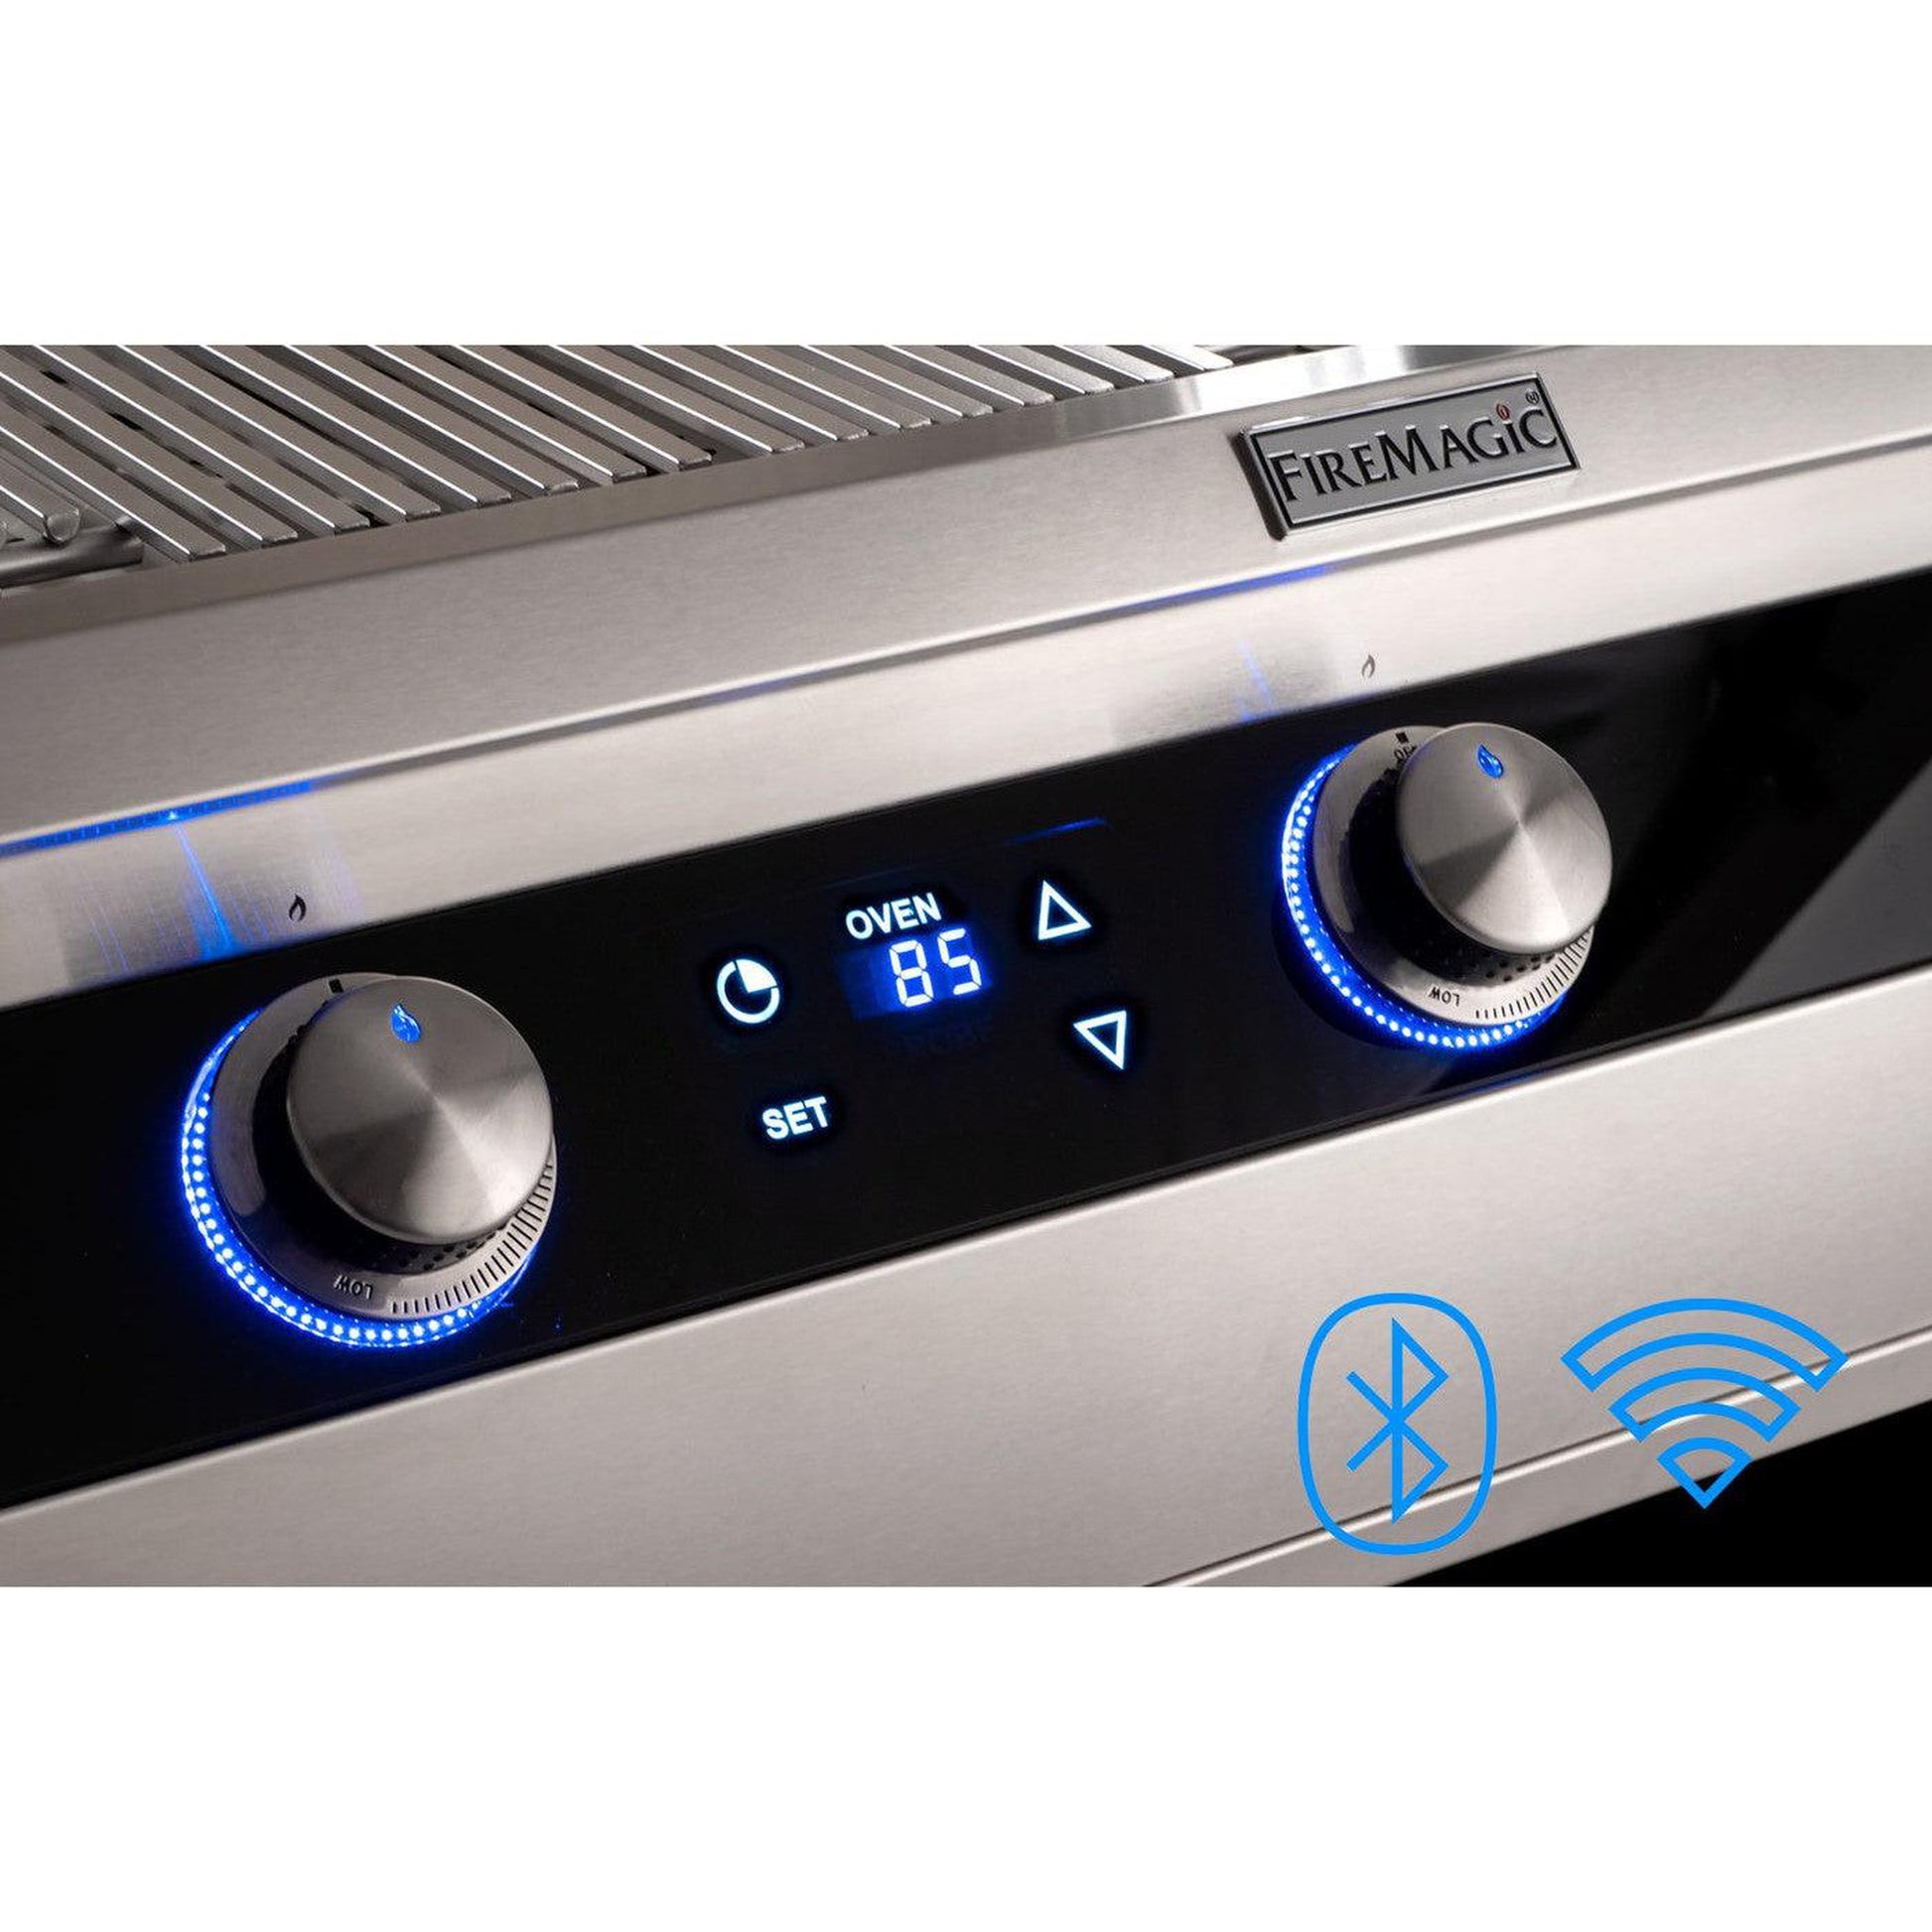 Fire Magic Echelon Diamond E790i 36" 3-Burner Built-In Gas Grill With Digital Thermometer and Optional Magic View Window